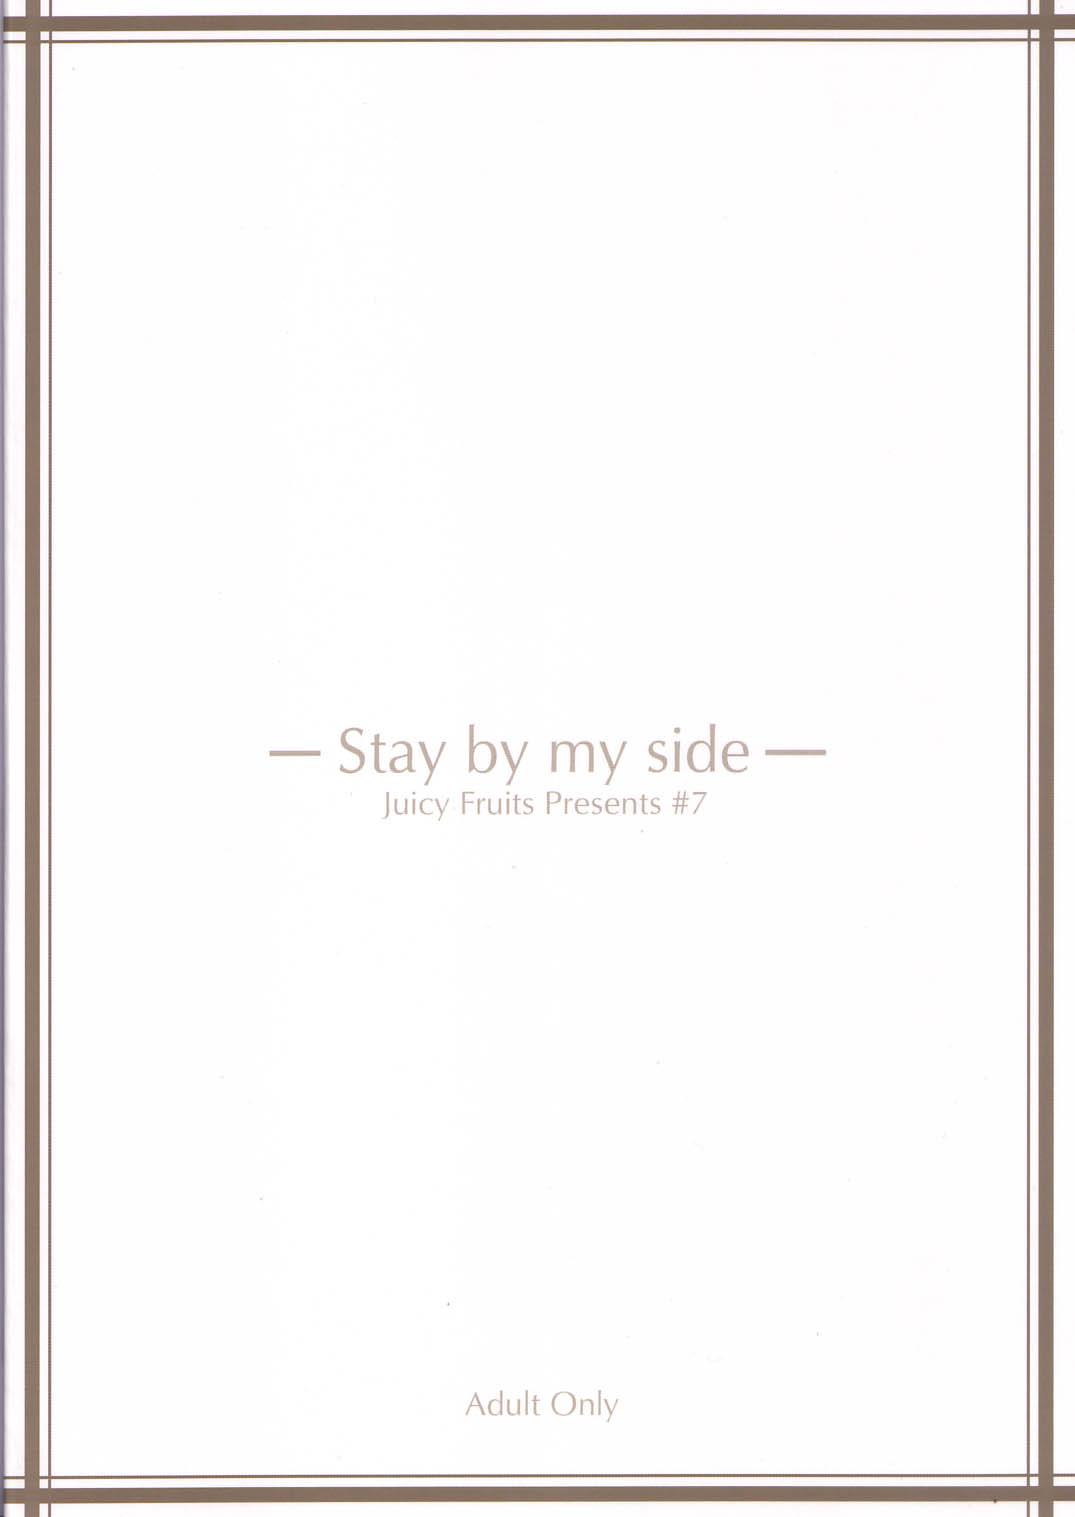 Stay by my side 26